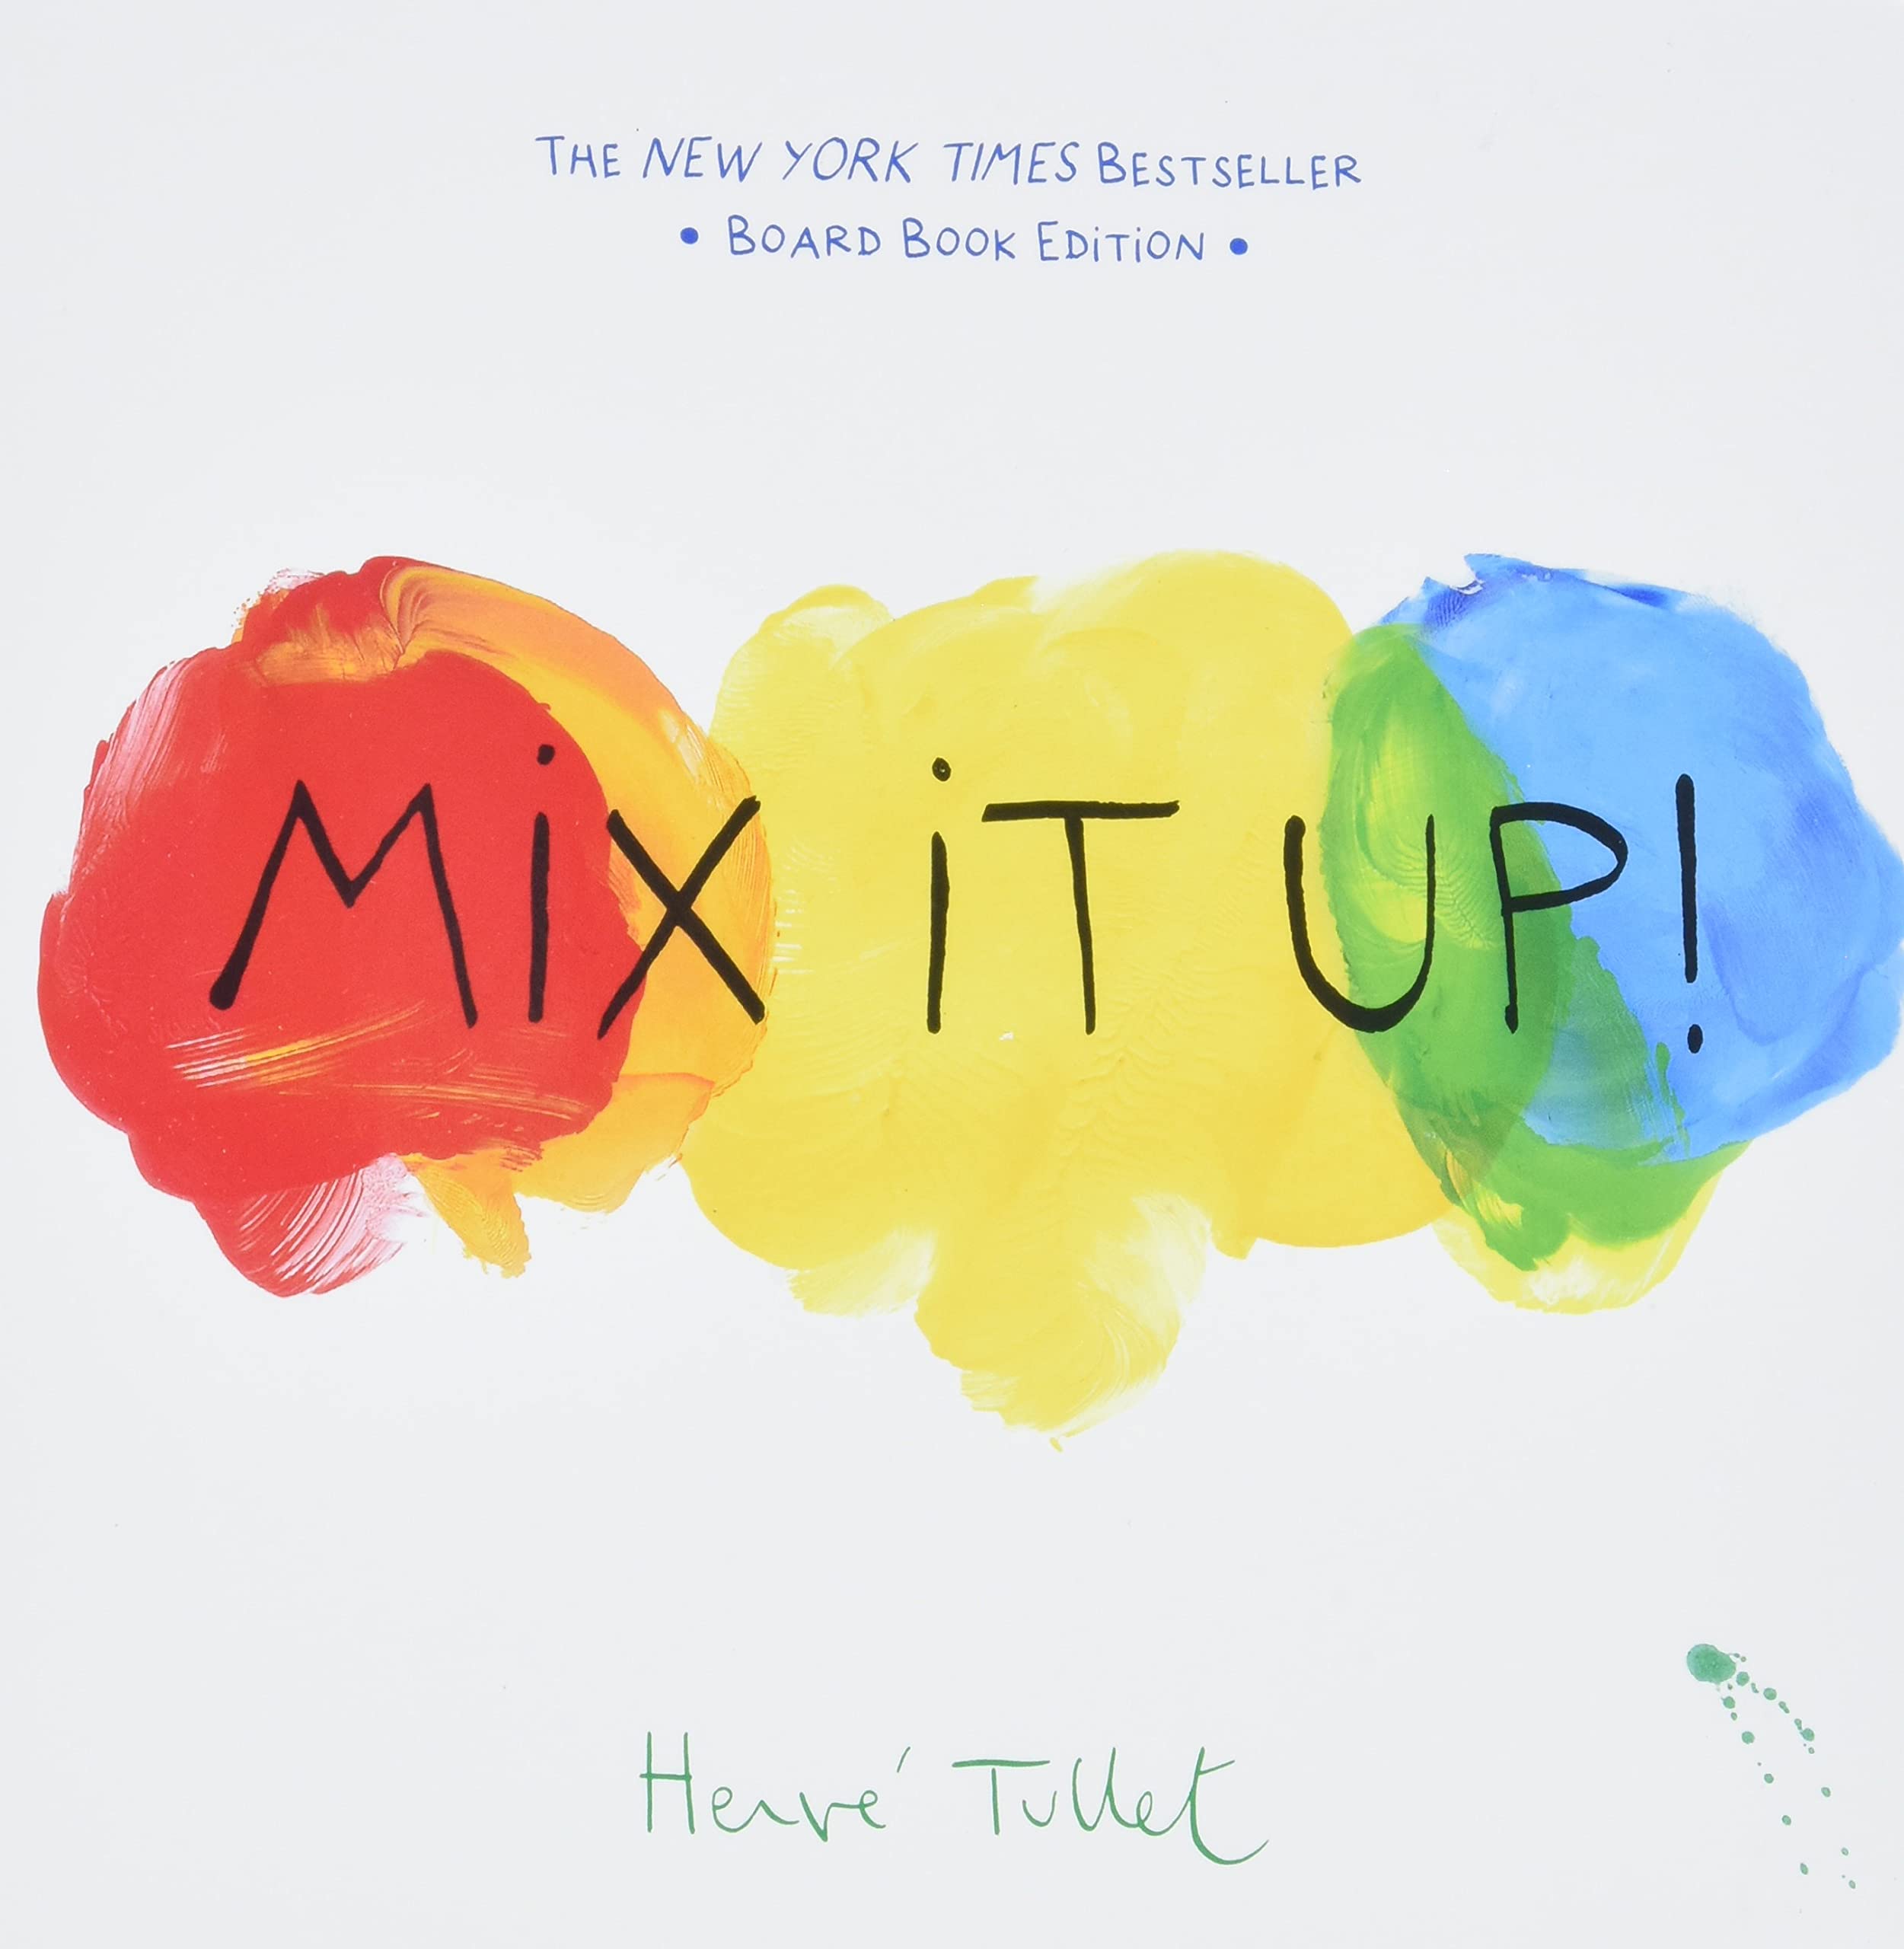 Mix it up!: Board book edition